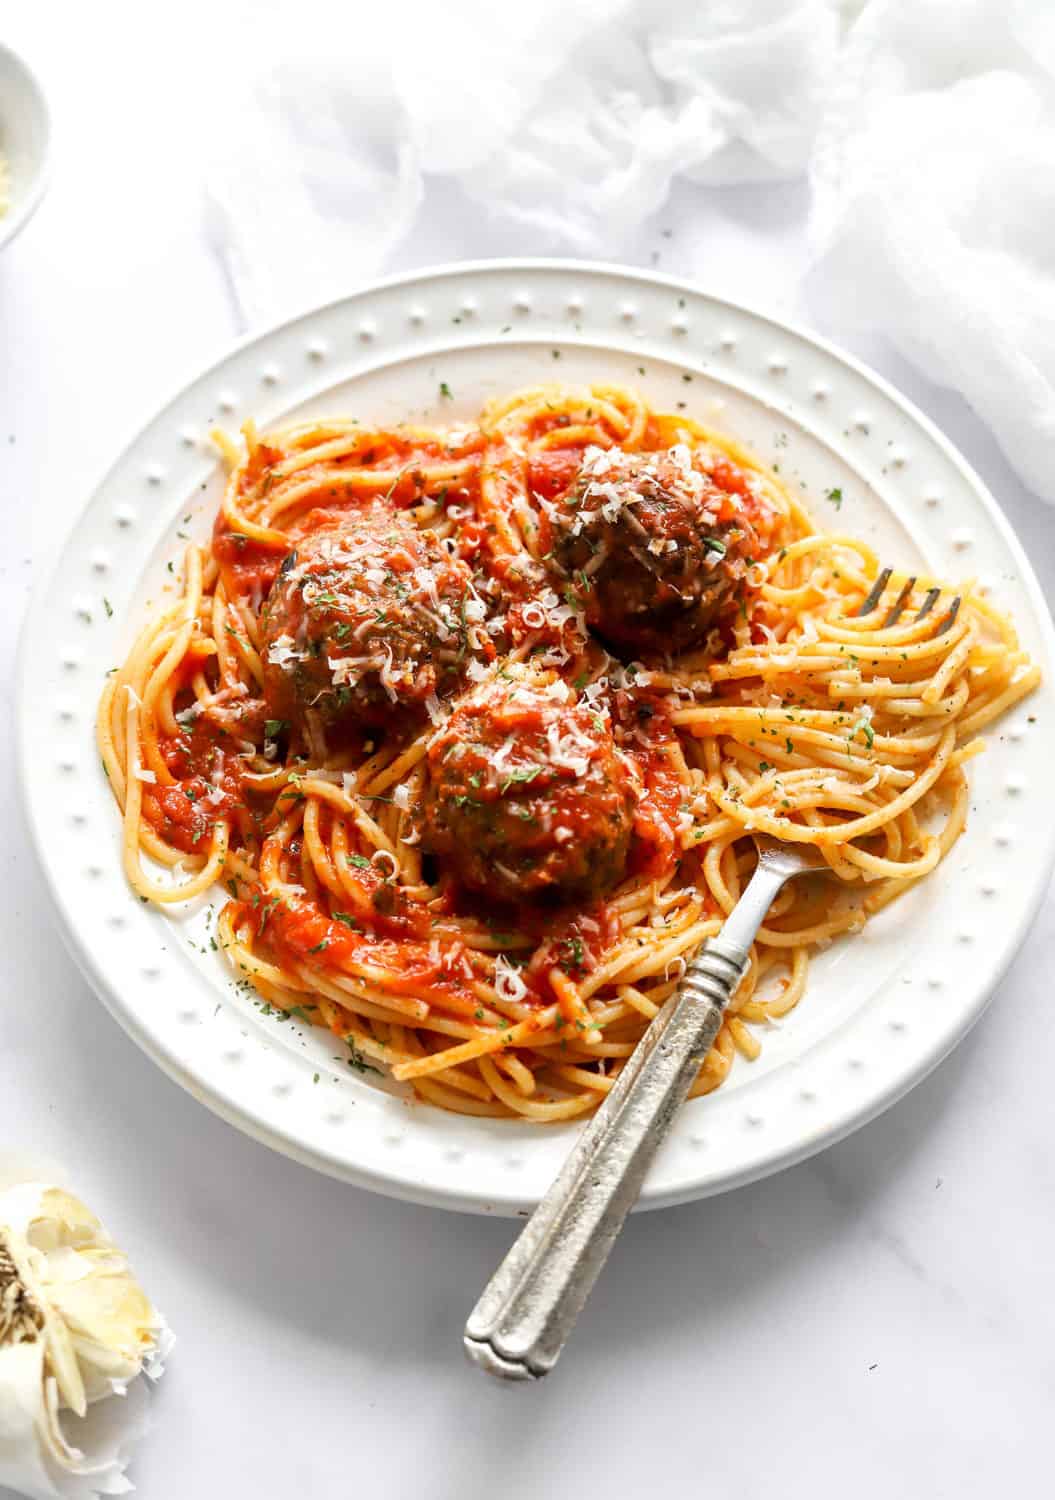 Meatballs layered in red tomato sauce with shredded parmesan on top of them over a bed of cooked spaghetti on a round, white plate. 